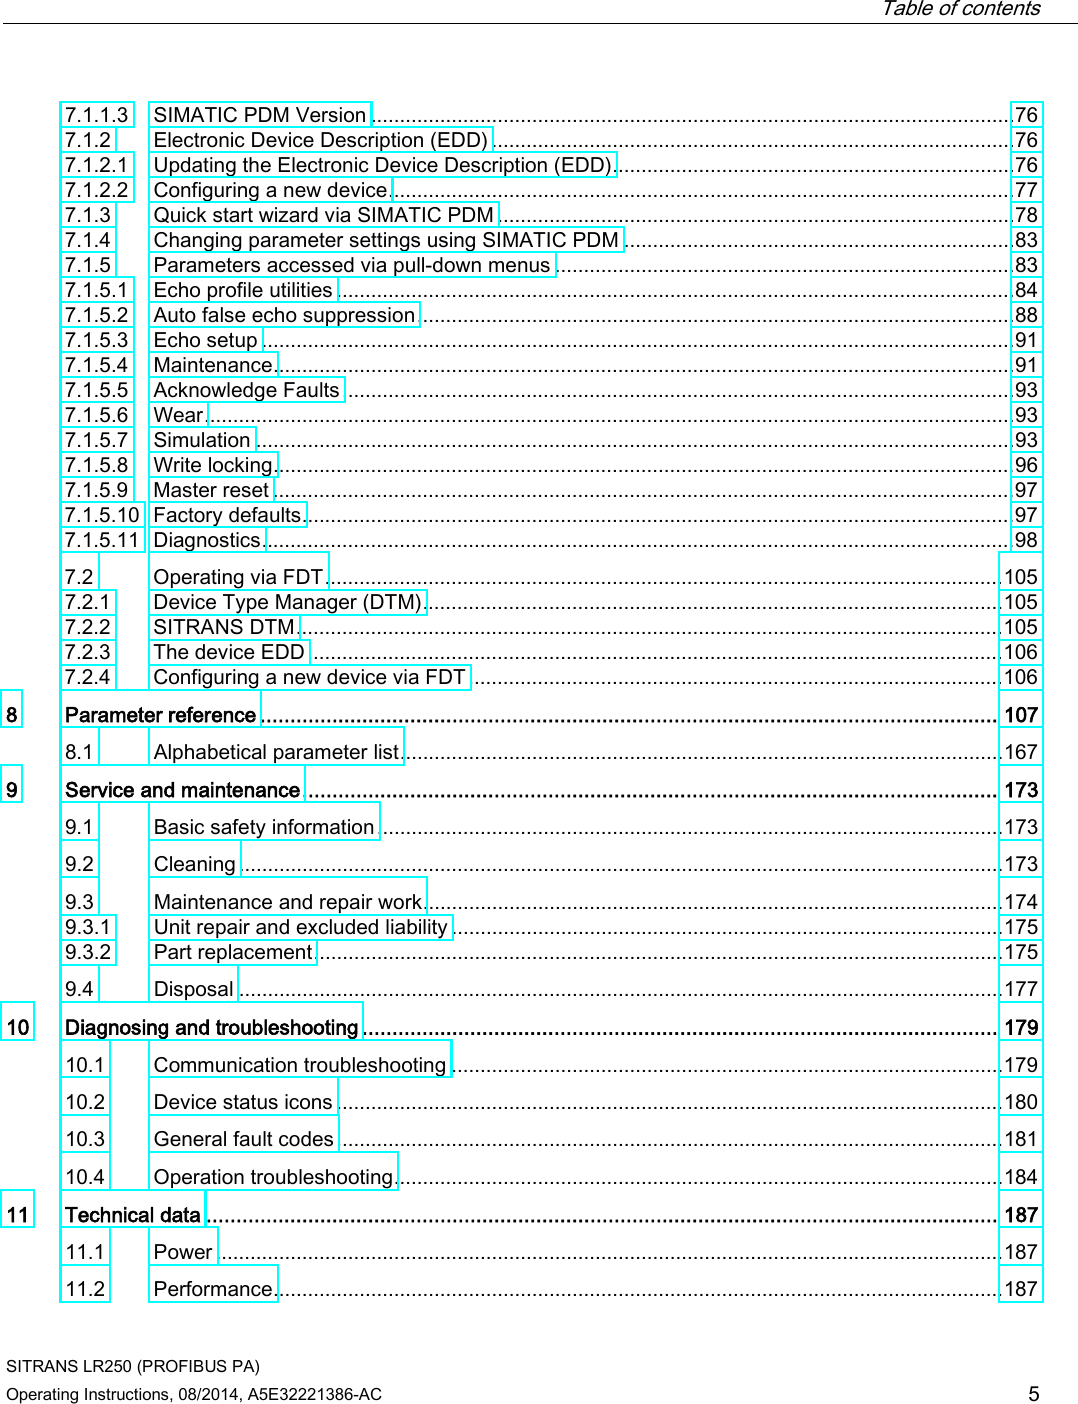  Table of contents   SITRANS LR250 (PROFIBUS PA) Operating Instructions, 08/2014, A5E32221386-AC 5 7.1.1.3 SIMATIC PDM Version ................................................................................................................ 76 7.1.2 Electronic Device Description (EDD) ........................................................................................... 76 7.1.2.1 Updating the Electronic Device Description (EDD) ...................................................................... 76 7.1.2.2 Configuring a new device ............................................................................................................. 77 7.1.3 Quick start wizard via SIMATIC PDM .......................................................................................... 78 7.1.4 Changing parameter settings using SIMATIC PDM .................................................................... 83 7.1.5 Parameters accessed via pull-down menus ................................................................................ 83 7.1.5.1 Echo profile utilities ...................................................................................................................... 84 7.1.5.2 Auto false echo suppression ........................................................................................................ 88 7.1.5.3 Echo setup ................................................................................................................................... 91 7.1.5.4 Maintenance ................................................................................................................................. 91 7.1.5.5 Acknowledge Faults ..................................................................................................................... 93 7.1.5.6 Wear ............................................................................................................................................. 93 7.1.5.7 Simulation .................................................................................................................................... 93 7.1.5.8 Write locking ................................................................................................................................. 96 7.1.5.9 Master reset ................................................................................................................................. 97 7.1.5.10 Factory defaults............................................................................................................................ 97 7.1.5.11 Diagnostics ................................................................................................................................... 98 7.2 Operating via FDT ...................................................................................................................... 105 7.2.1 Device Type Manager (DTM) ..................................................................................................... 105 7.2.2 SITRANS DTM ........................................................................................................................... 105 7.2.3 The device EDD ......................................................................................................................... 106 7.2.4 Configuring a new device via FDT ............................................................................................. 106 8  Parameter reference ........................................................................................................................... 107 8.1 Alphabetical parameter list ......................................................................................................... 167 9  Service and maintenance .................................................................................................................... 173 9.1 Basic safety information ............................................................................................................. 173 9.2 Cleaning ..................................................................................................................................... 173 9.3 Maintenance and repair work ..................................................................................................... 174 9.3.1 Unit repair and excluded liability ................................................................................................ 175 9.3.2 Part replacement ........................................................................................................................ 175 9.4 Disposal ..................................................................................................................................... 177 10 Diagnosing and troubleshooting .......................................................................................................... 179 10.1 Communication troubleshooting ................................................................................................ 179 10.2 Device status icons .................................................................................................................... 180 10.3 General fault codes .................................................................................................................... 181 10.4 Operation troubleshooting .......................................................................................................... 184 11 Technical data .................................................................................................................................... 187 11.1 Power ......................................................................................................................................... 187 11.2  Performance ............................................................................................................................... 187 